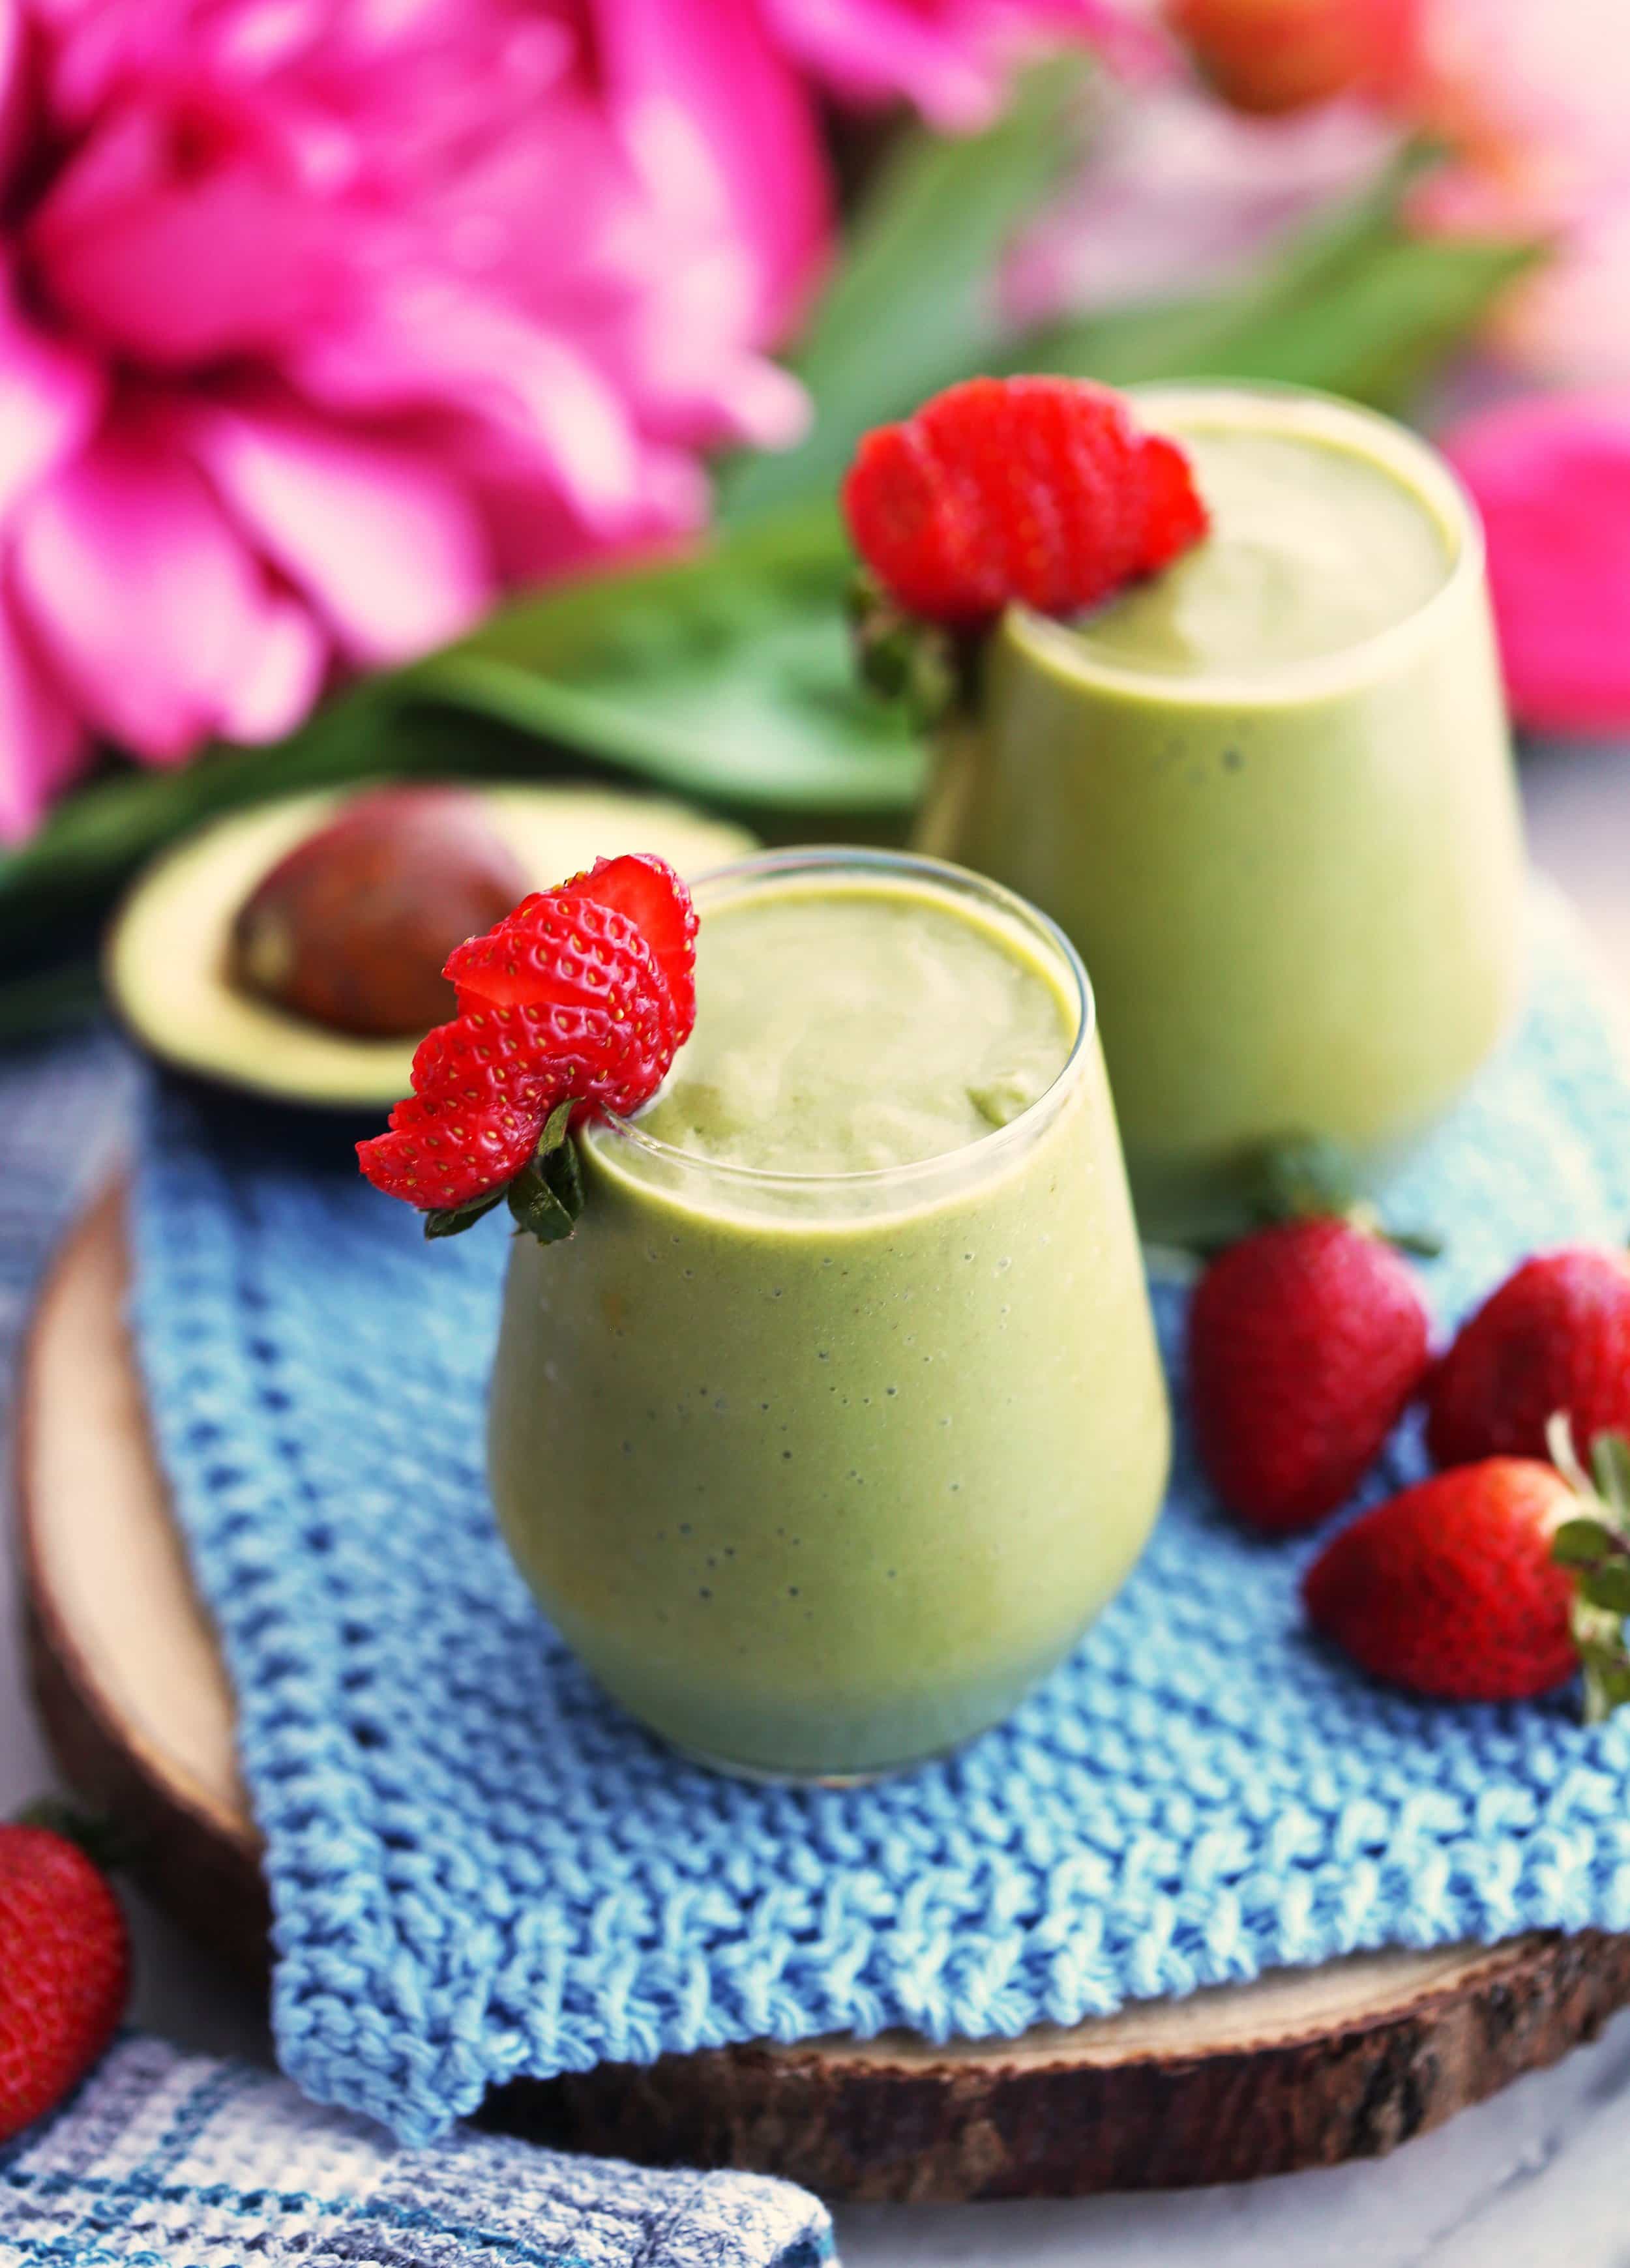 A top angled view of two green smoothies made with avocado, strawberries, spinach, and almond milk.